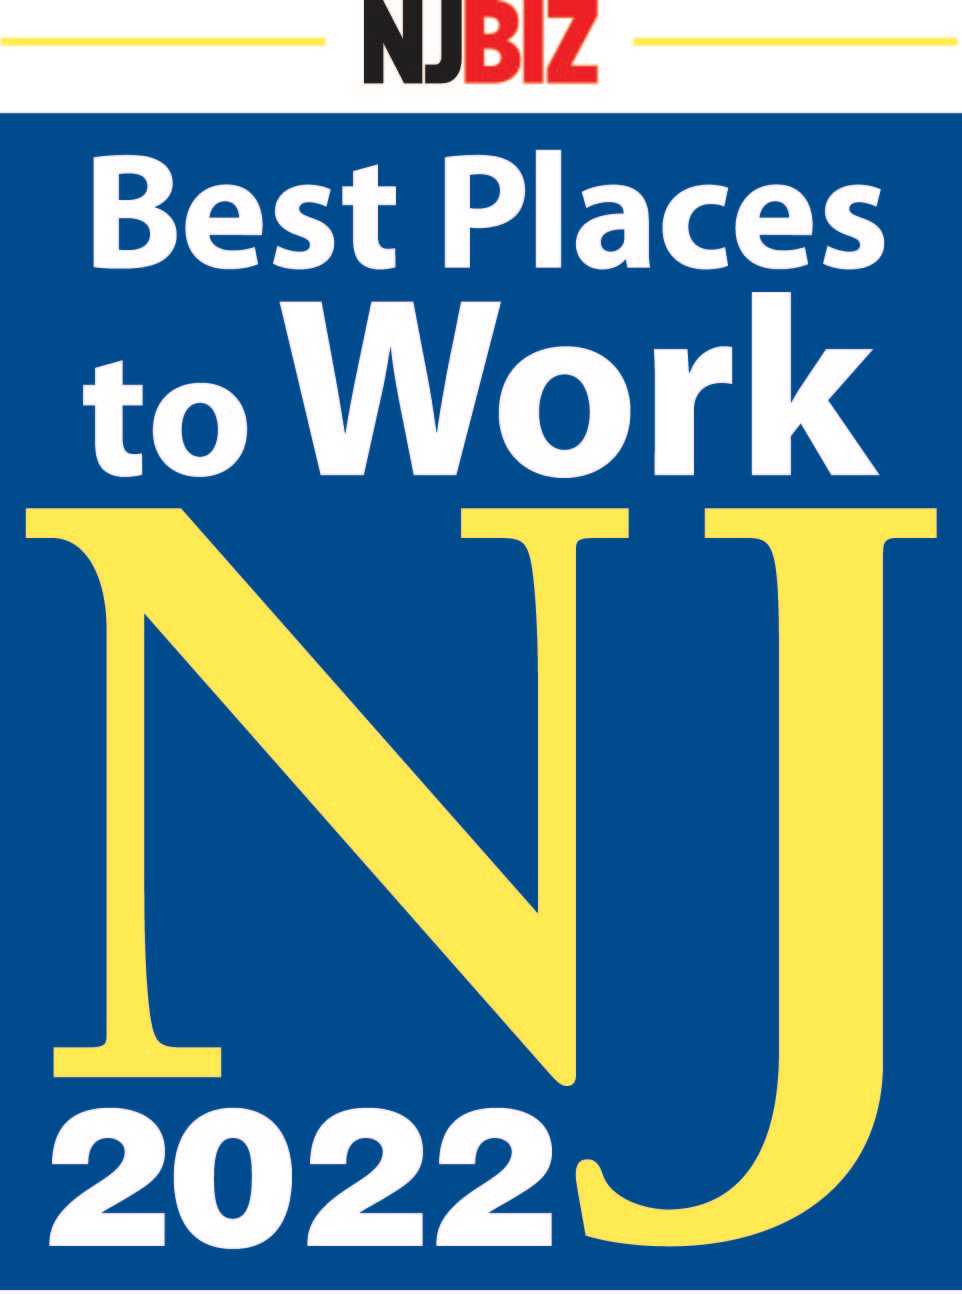 Rated Best Places to Work NJ 2022 by NJBIZ